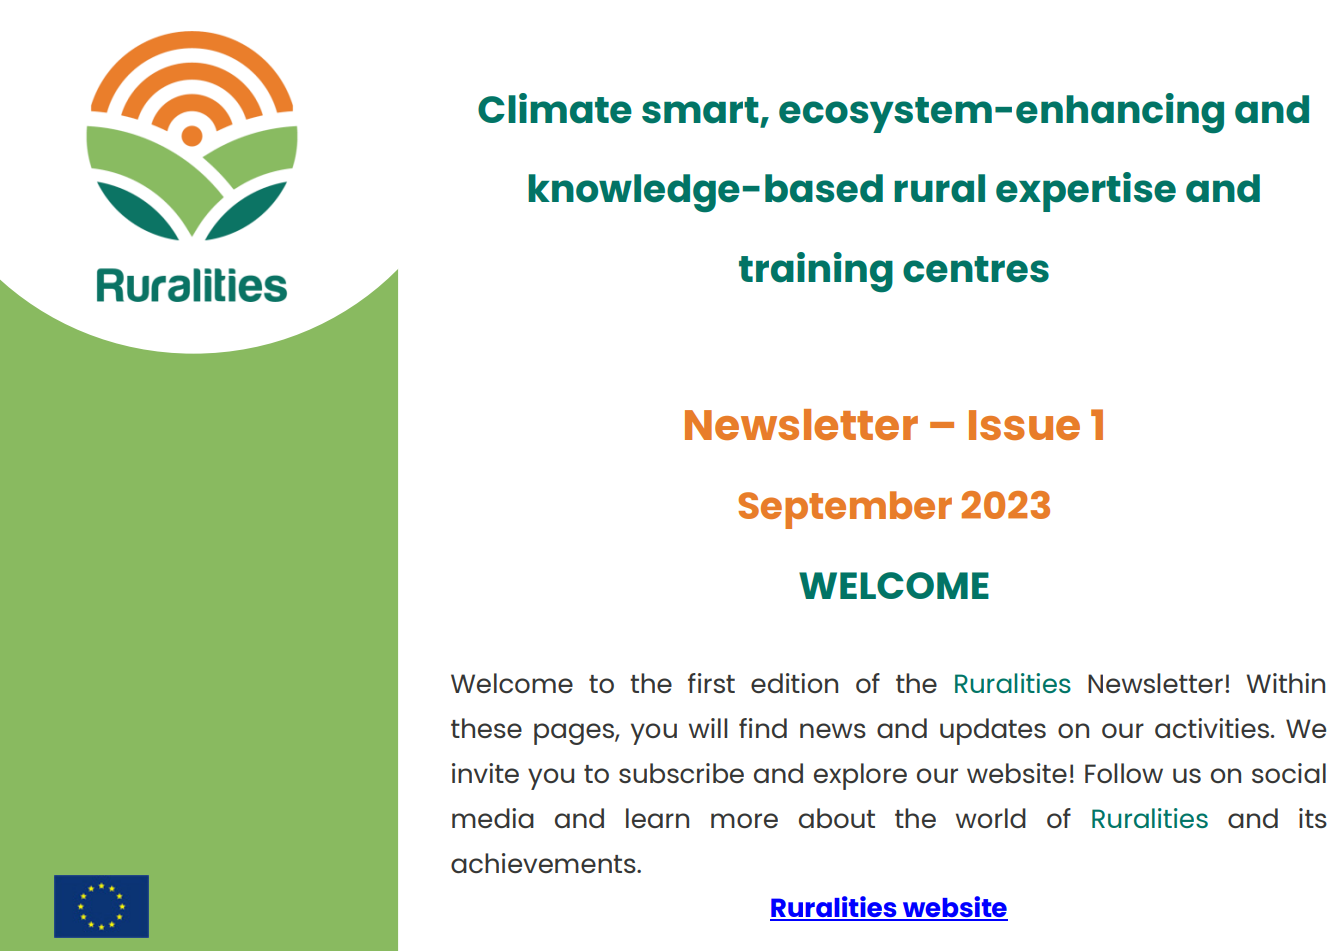 Introducing the First RURALITIES Newsletter!